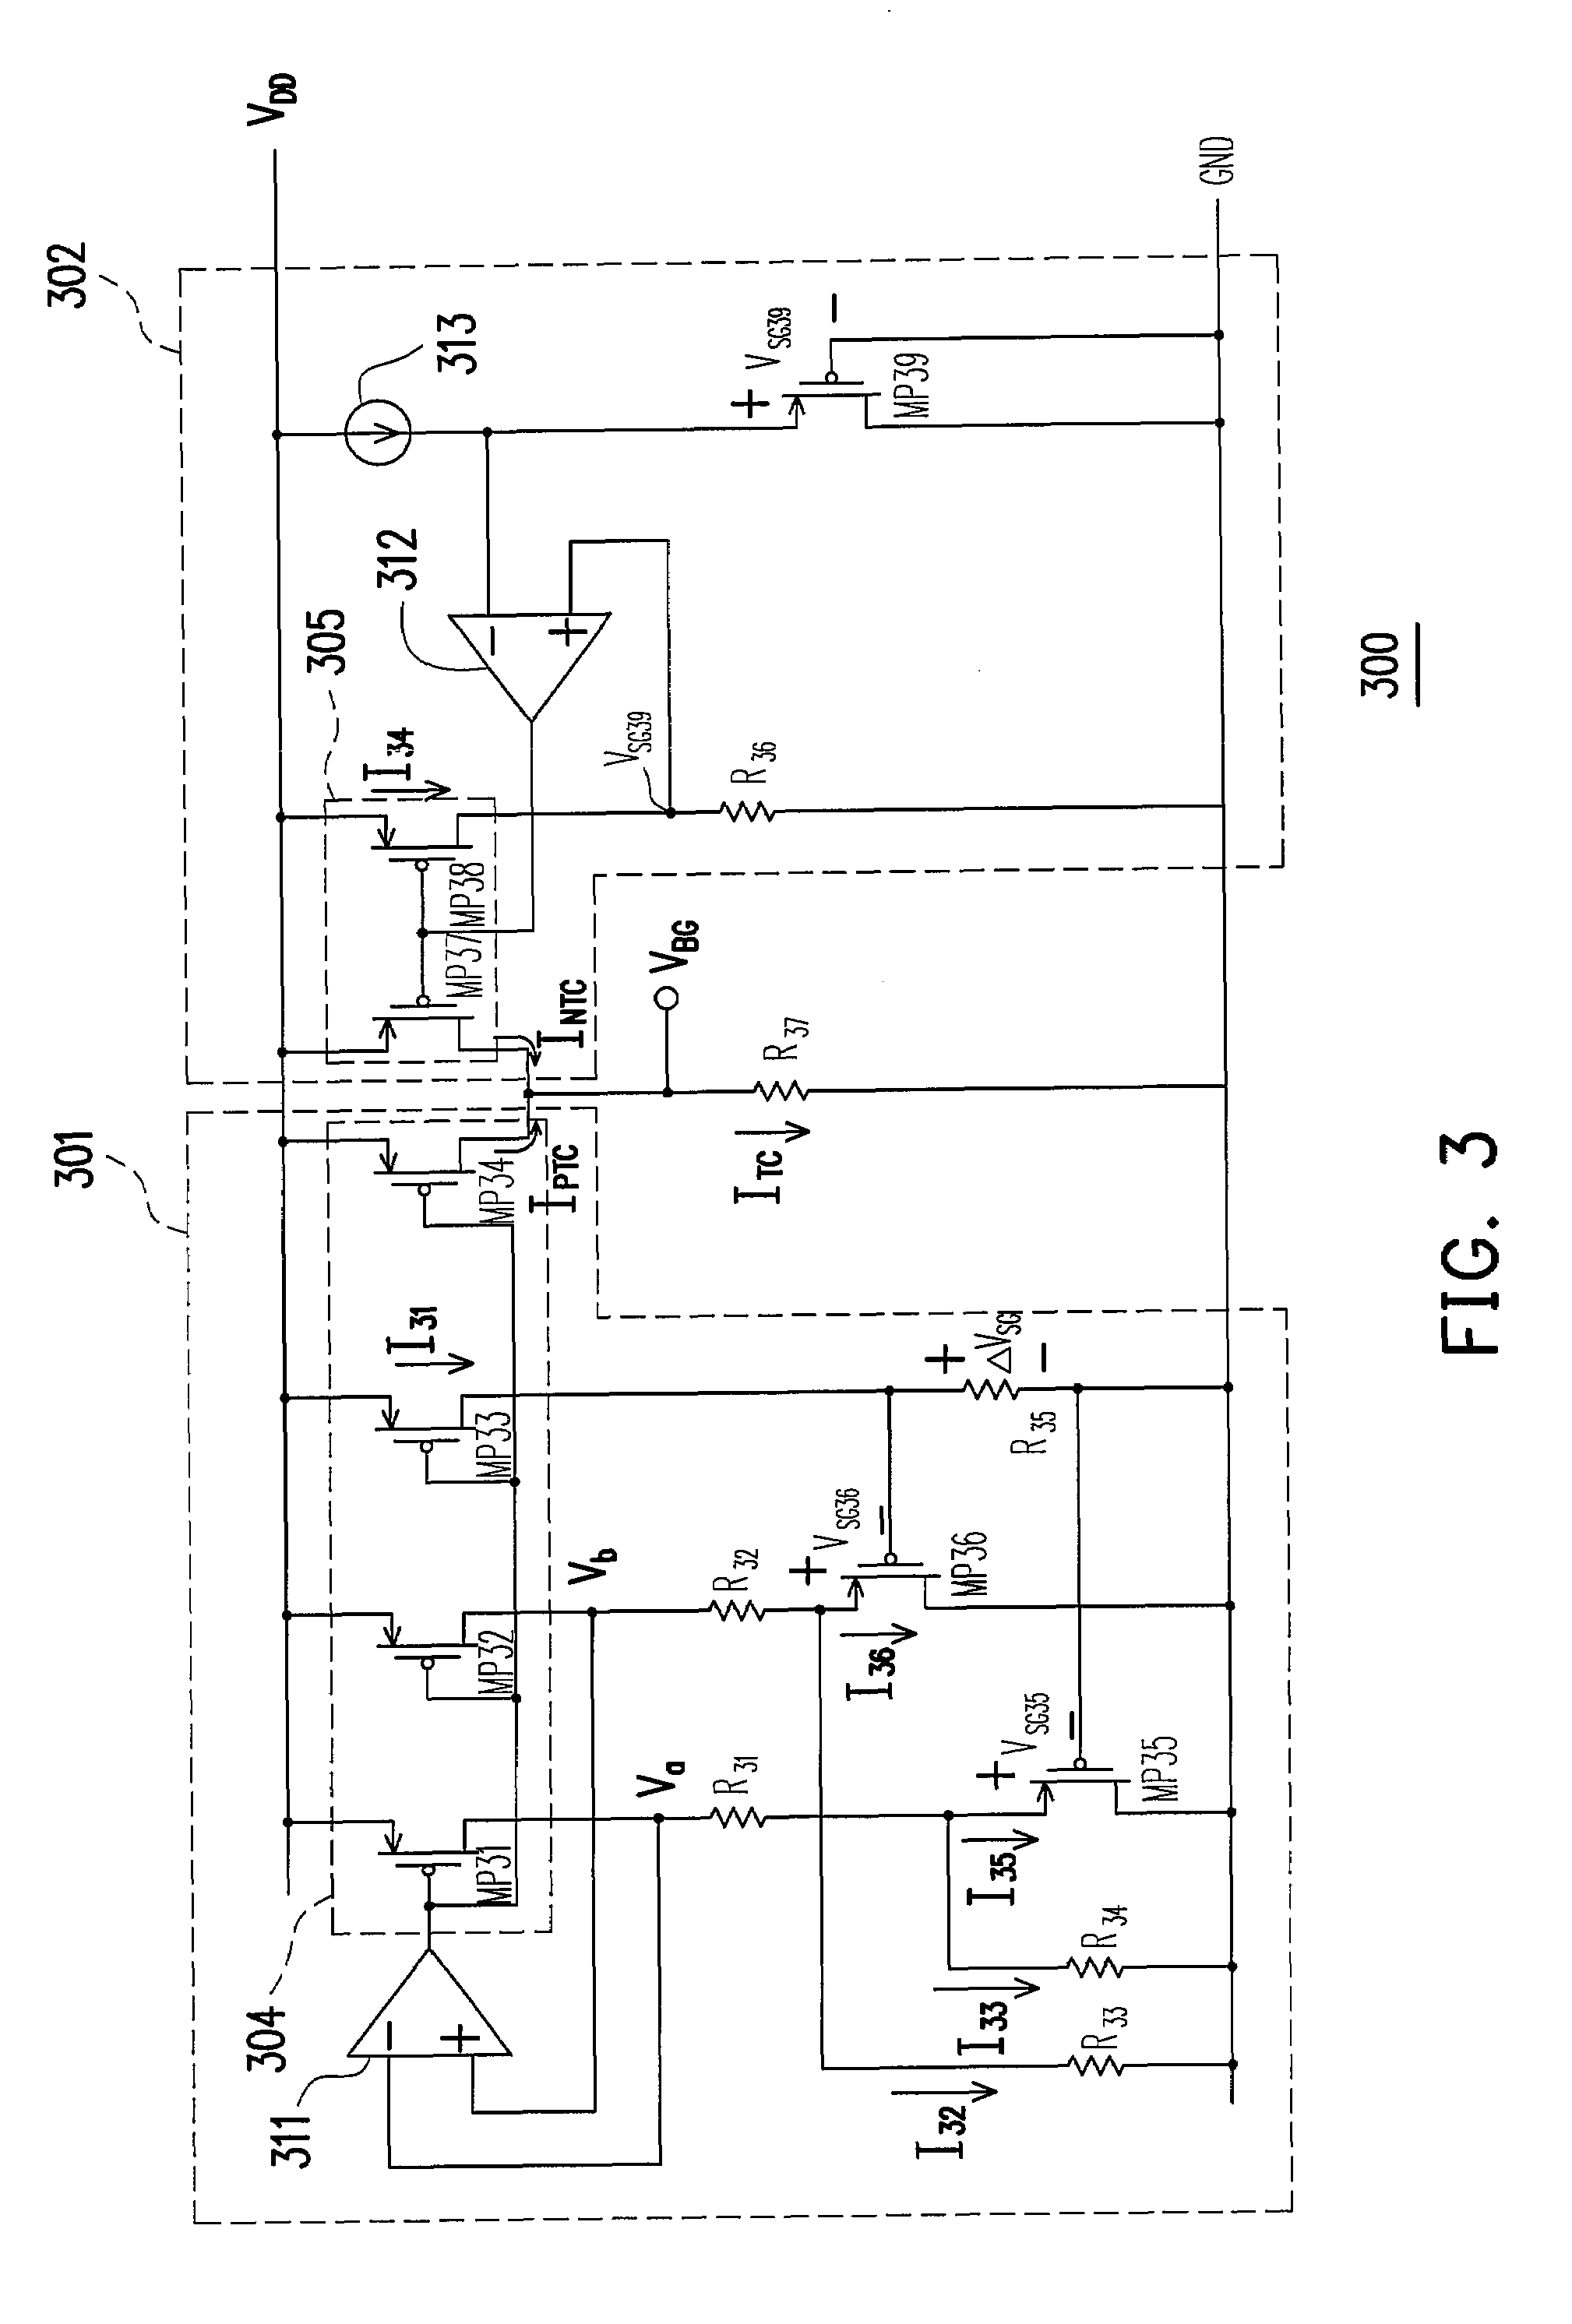 Voltage reference circuit